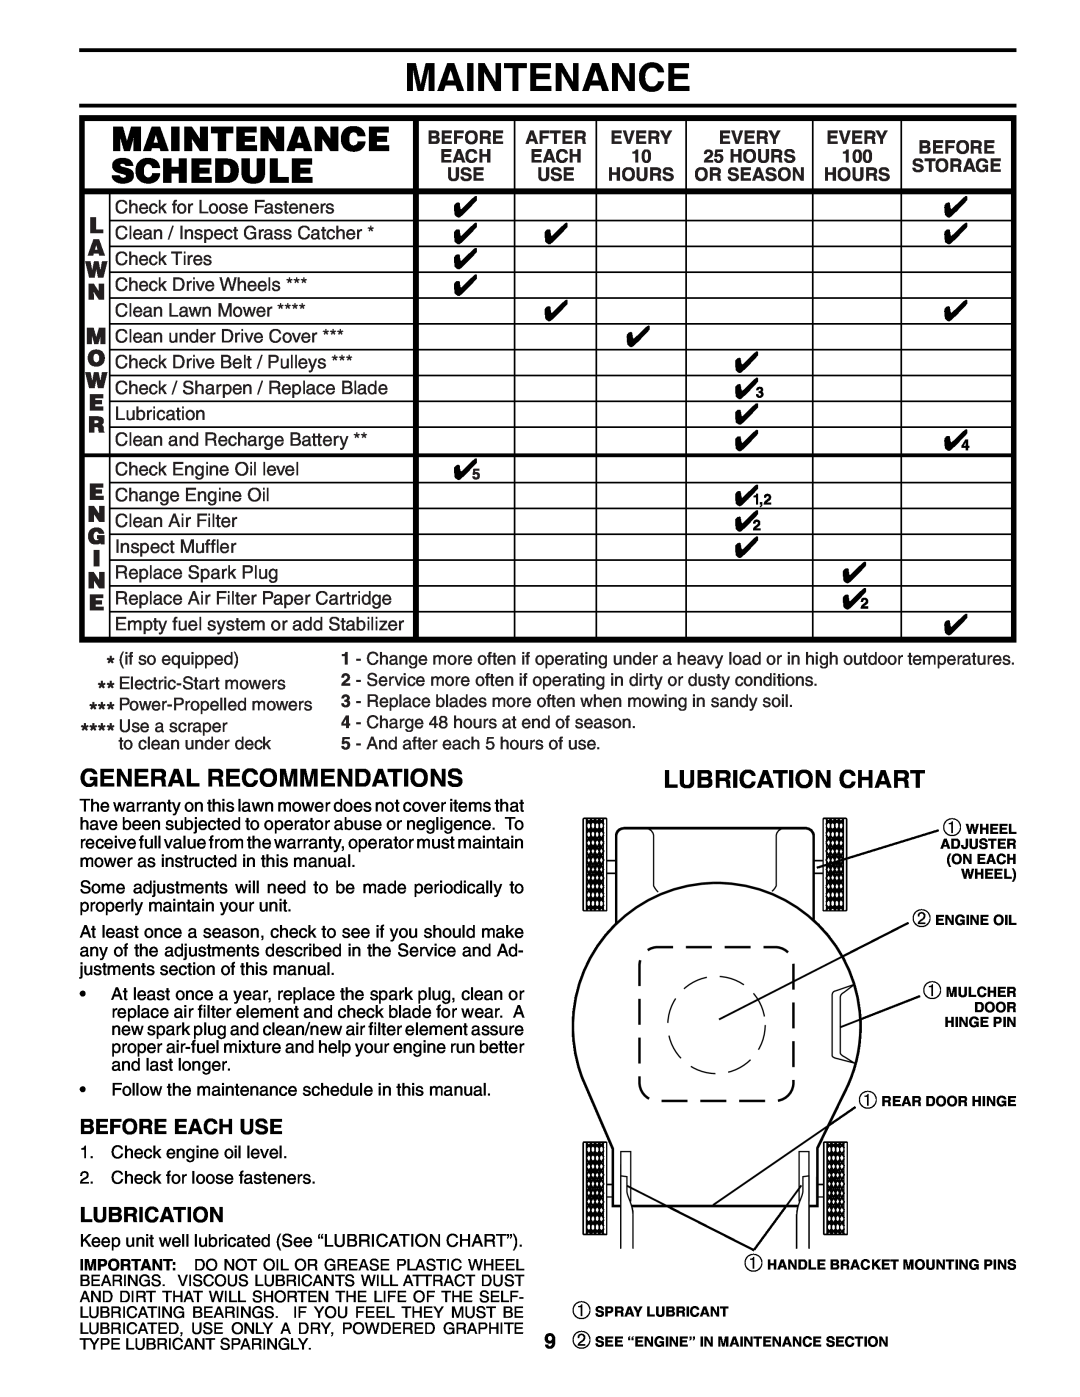 Husqvarna 62522SH Maintenance, General Recommendations, Lubrication Chart, Before Each Use, After, Every, Storage, Hours 